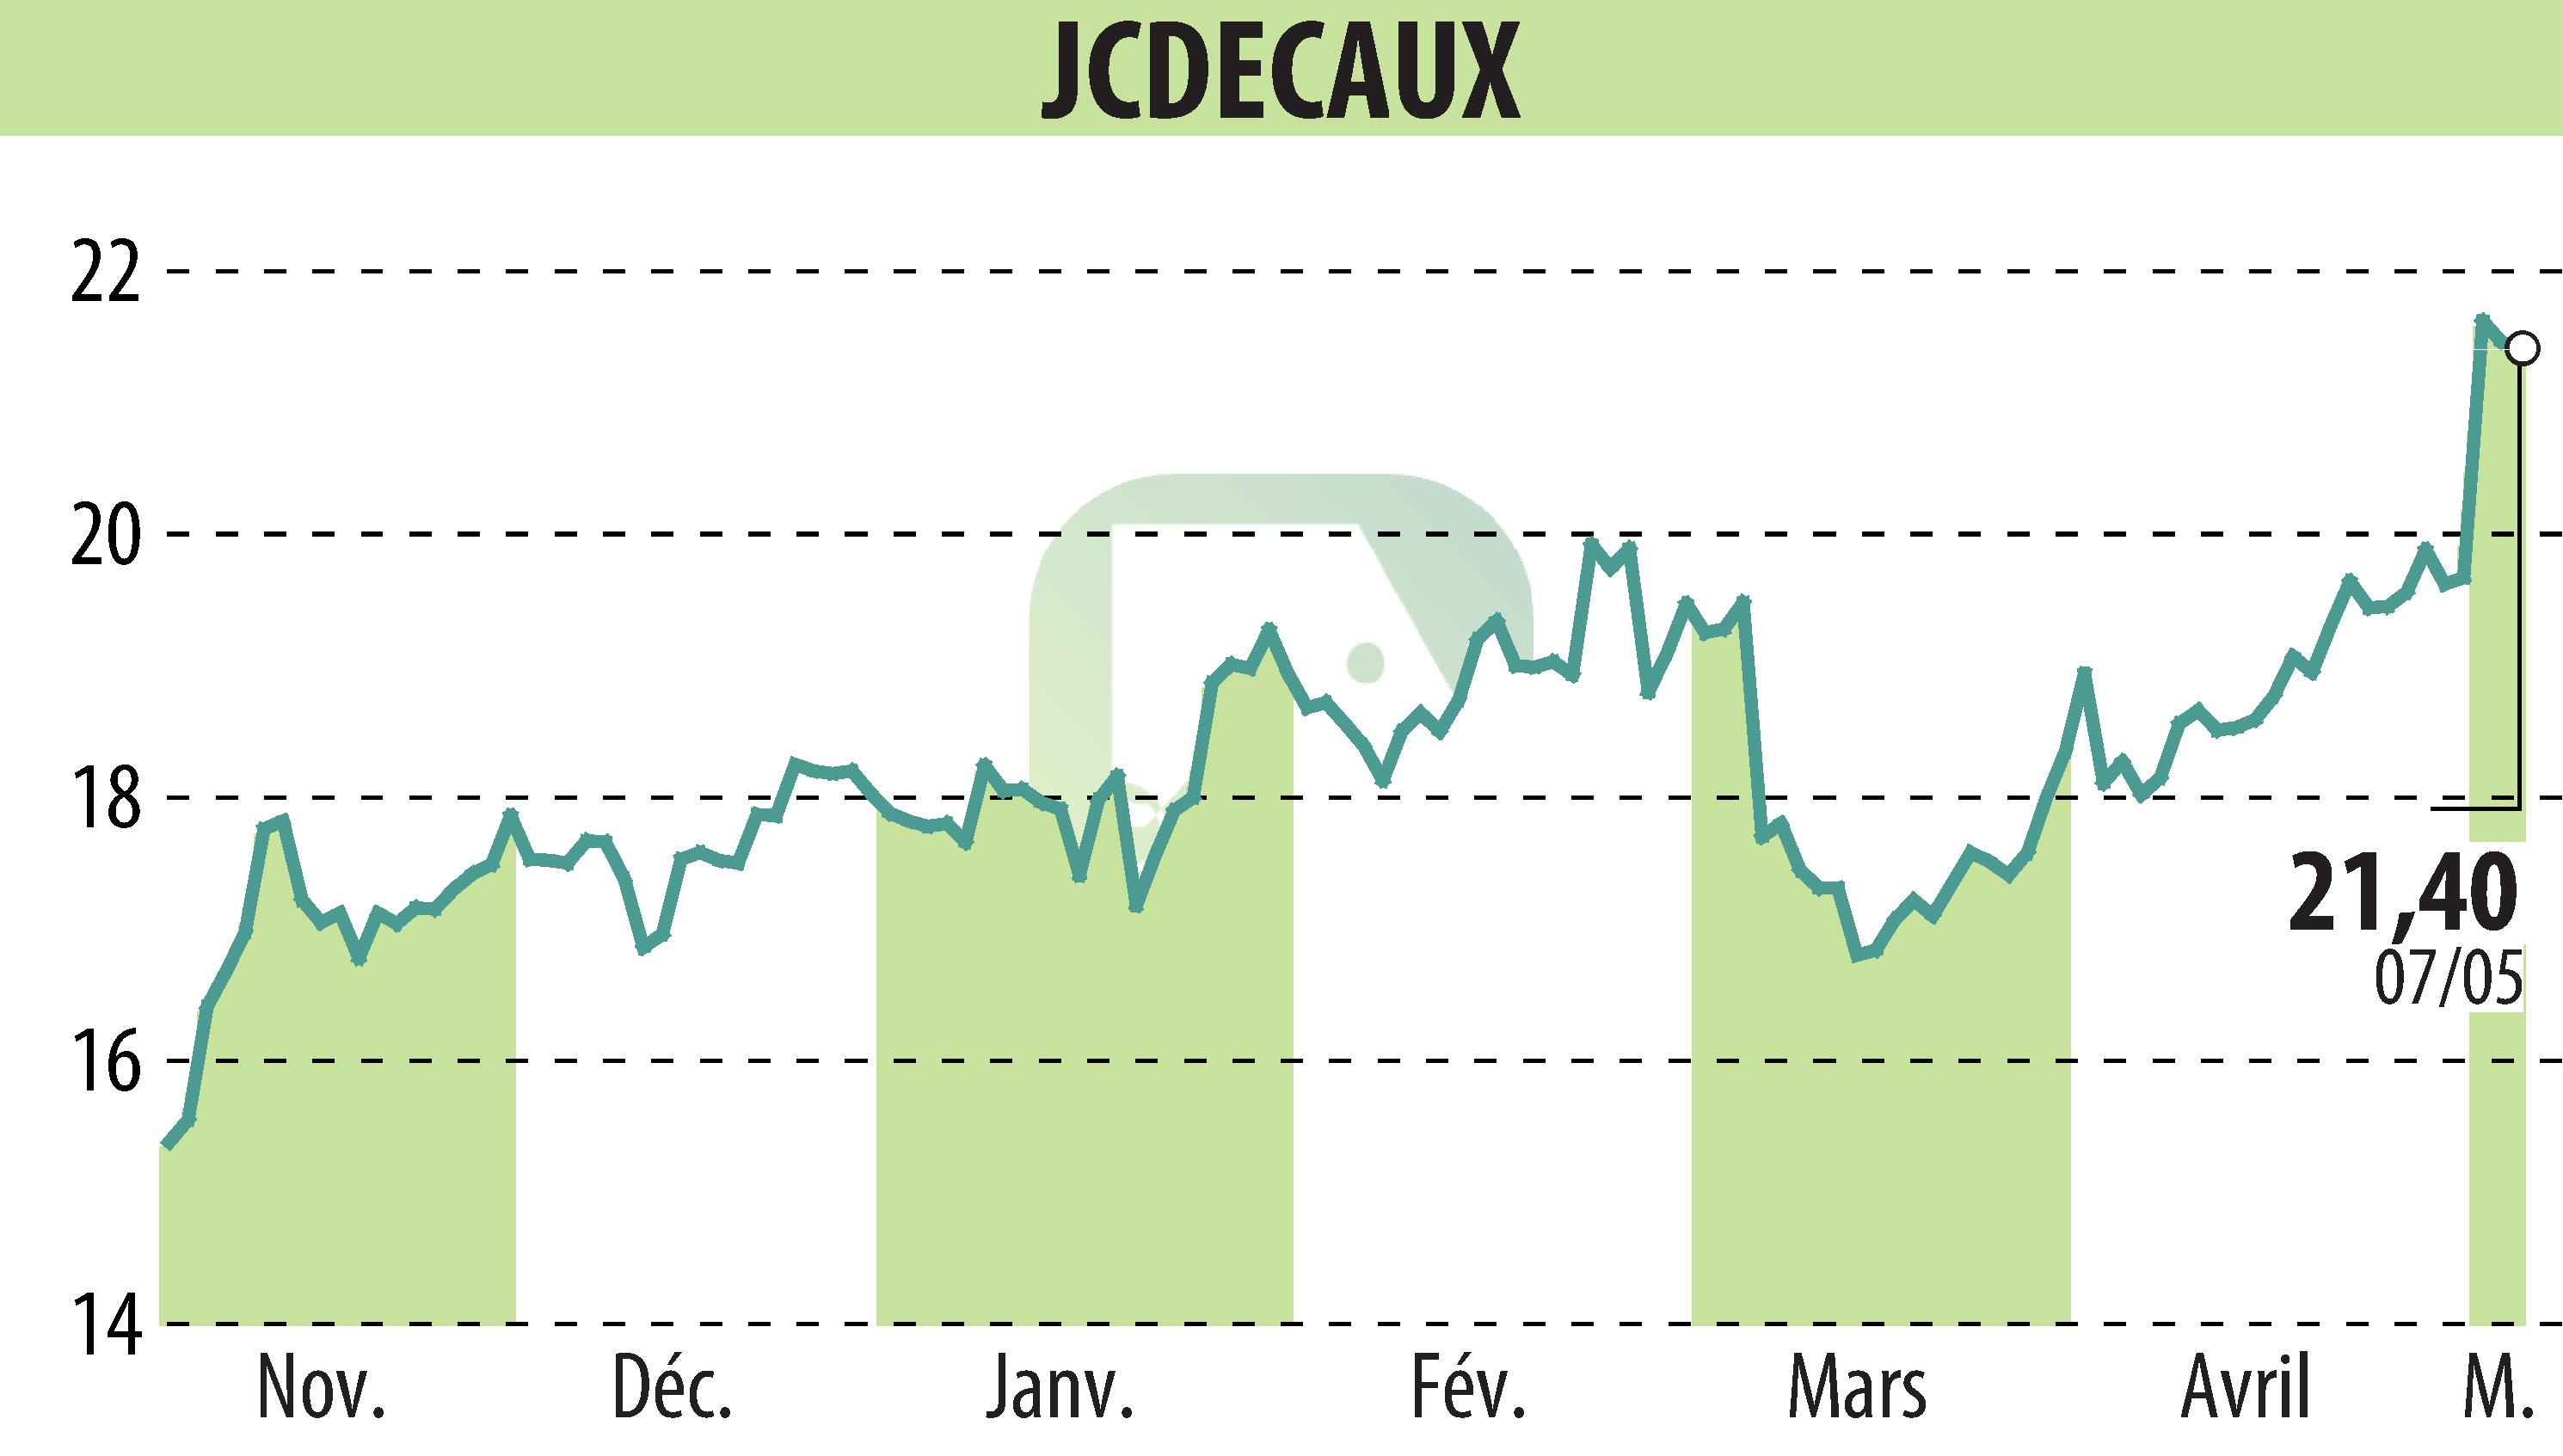 Stock price chart of JCDECAUX (EPA:DEC) showing fluctuations.